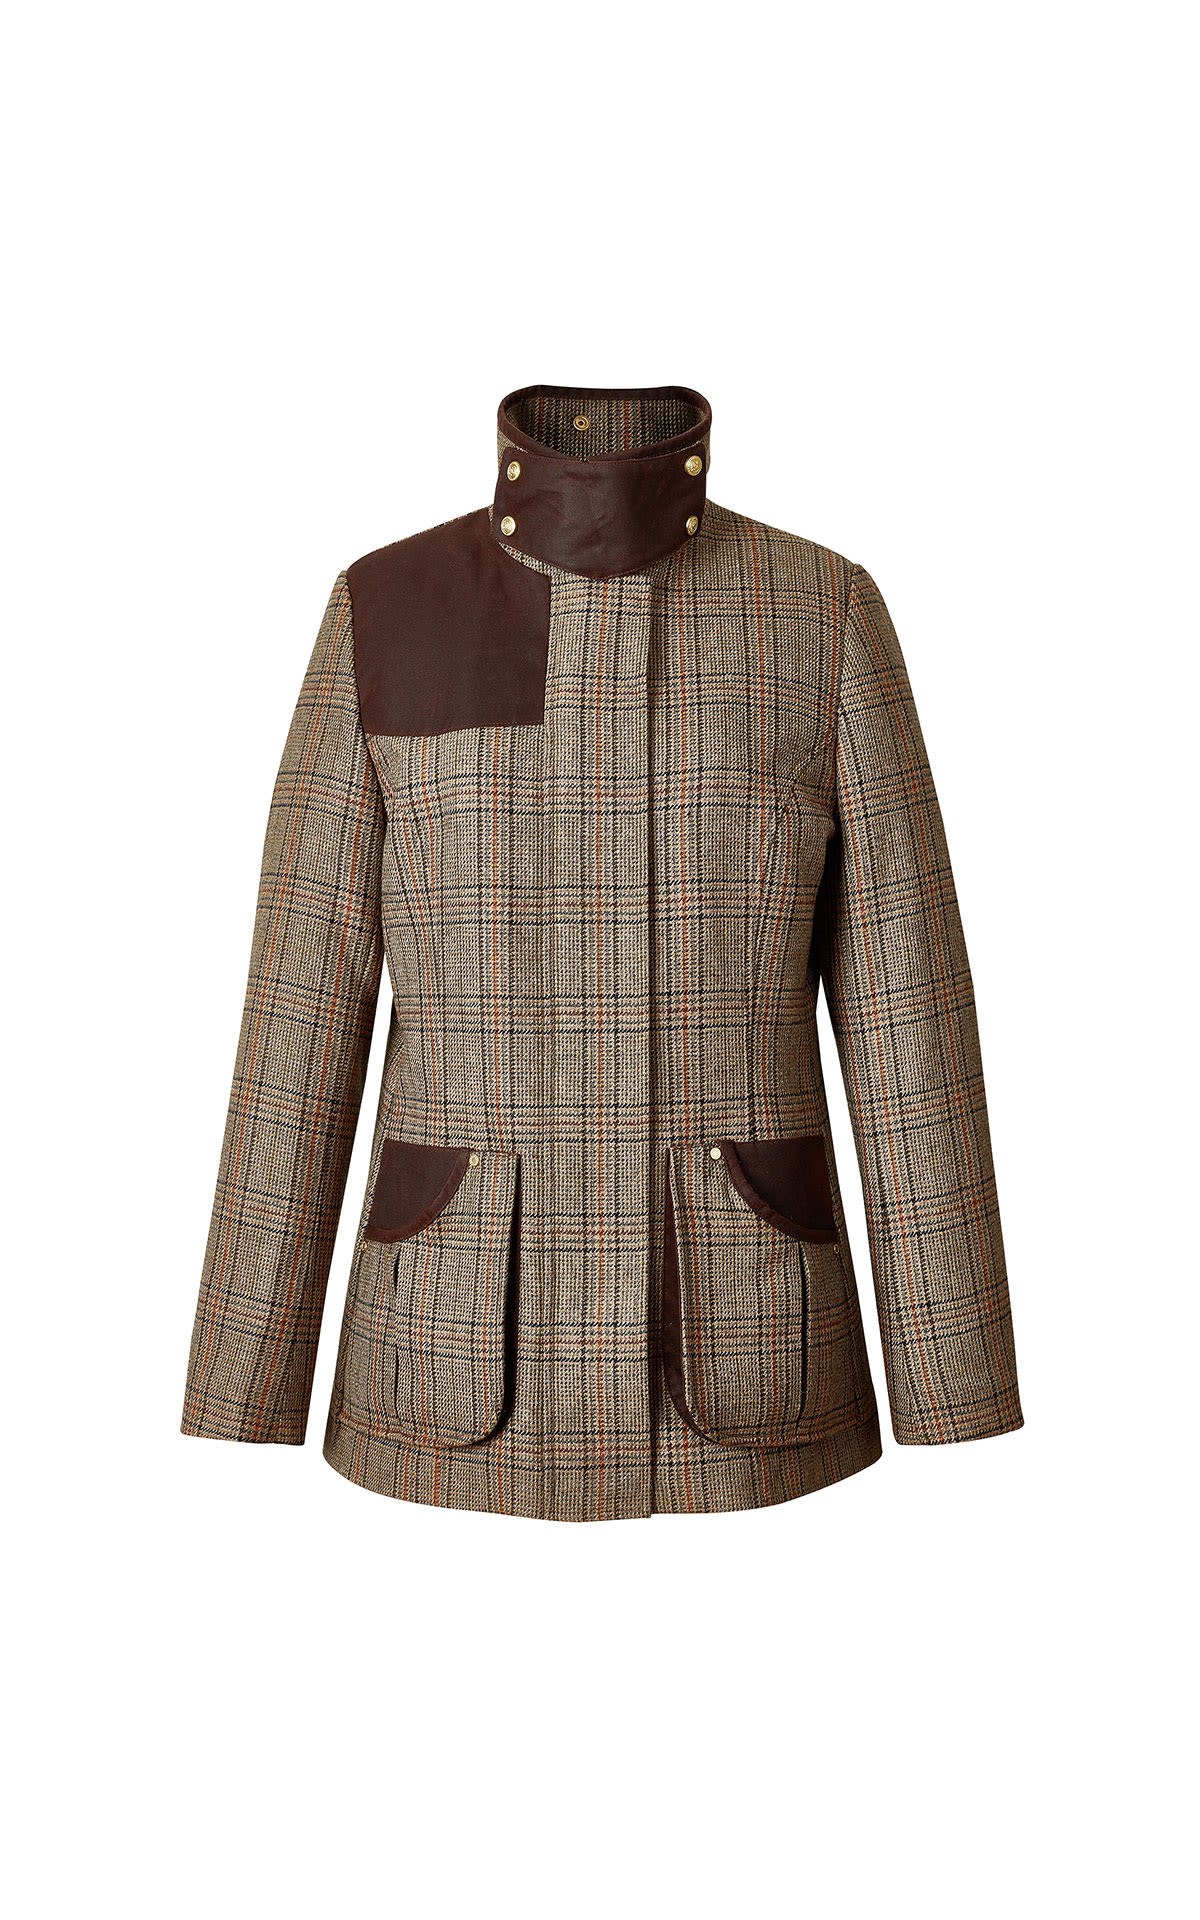 Holland Cooper Country classic jacket from Bicester Village